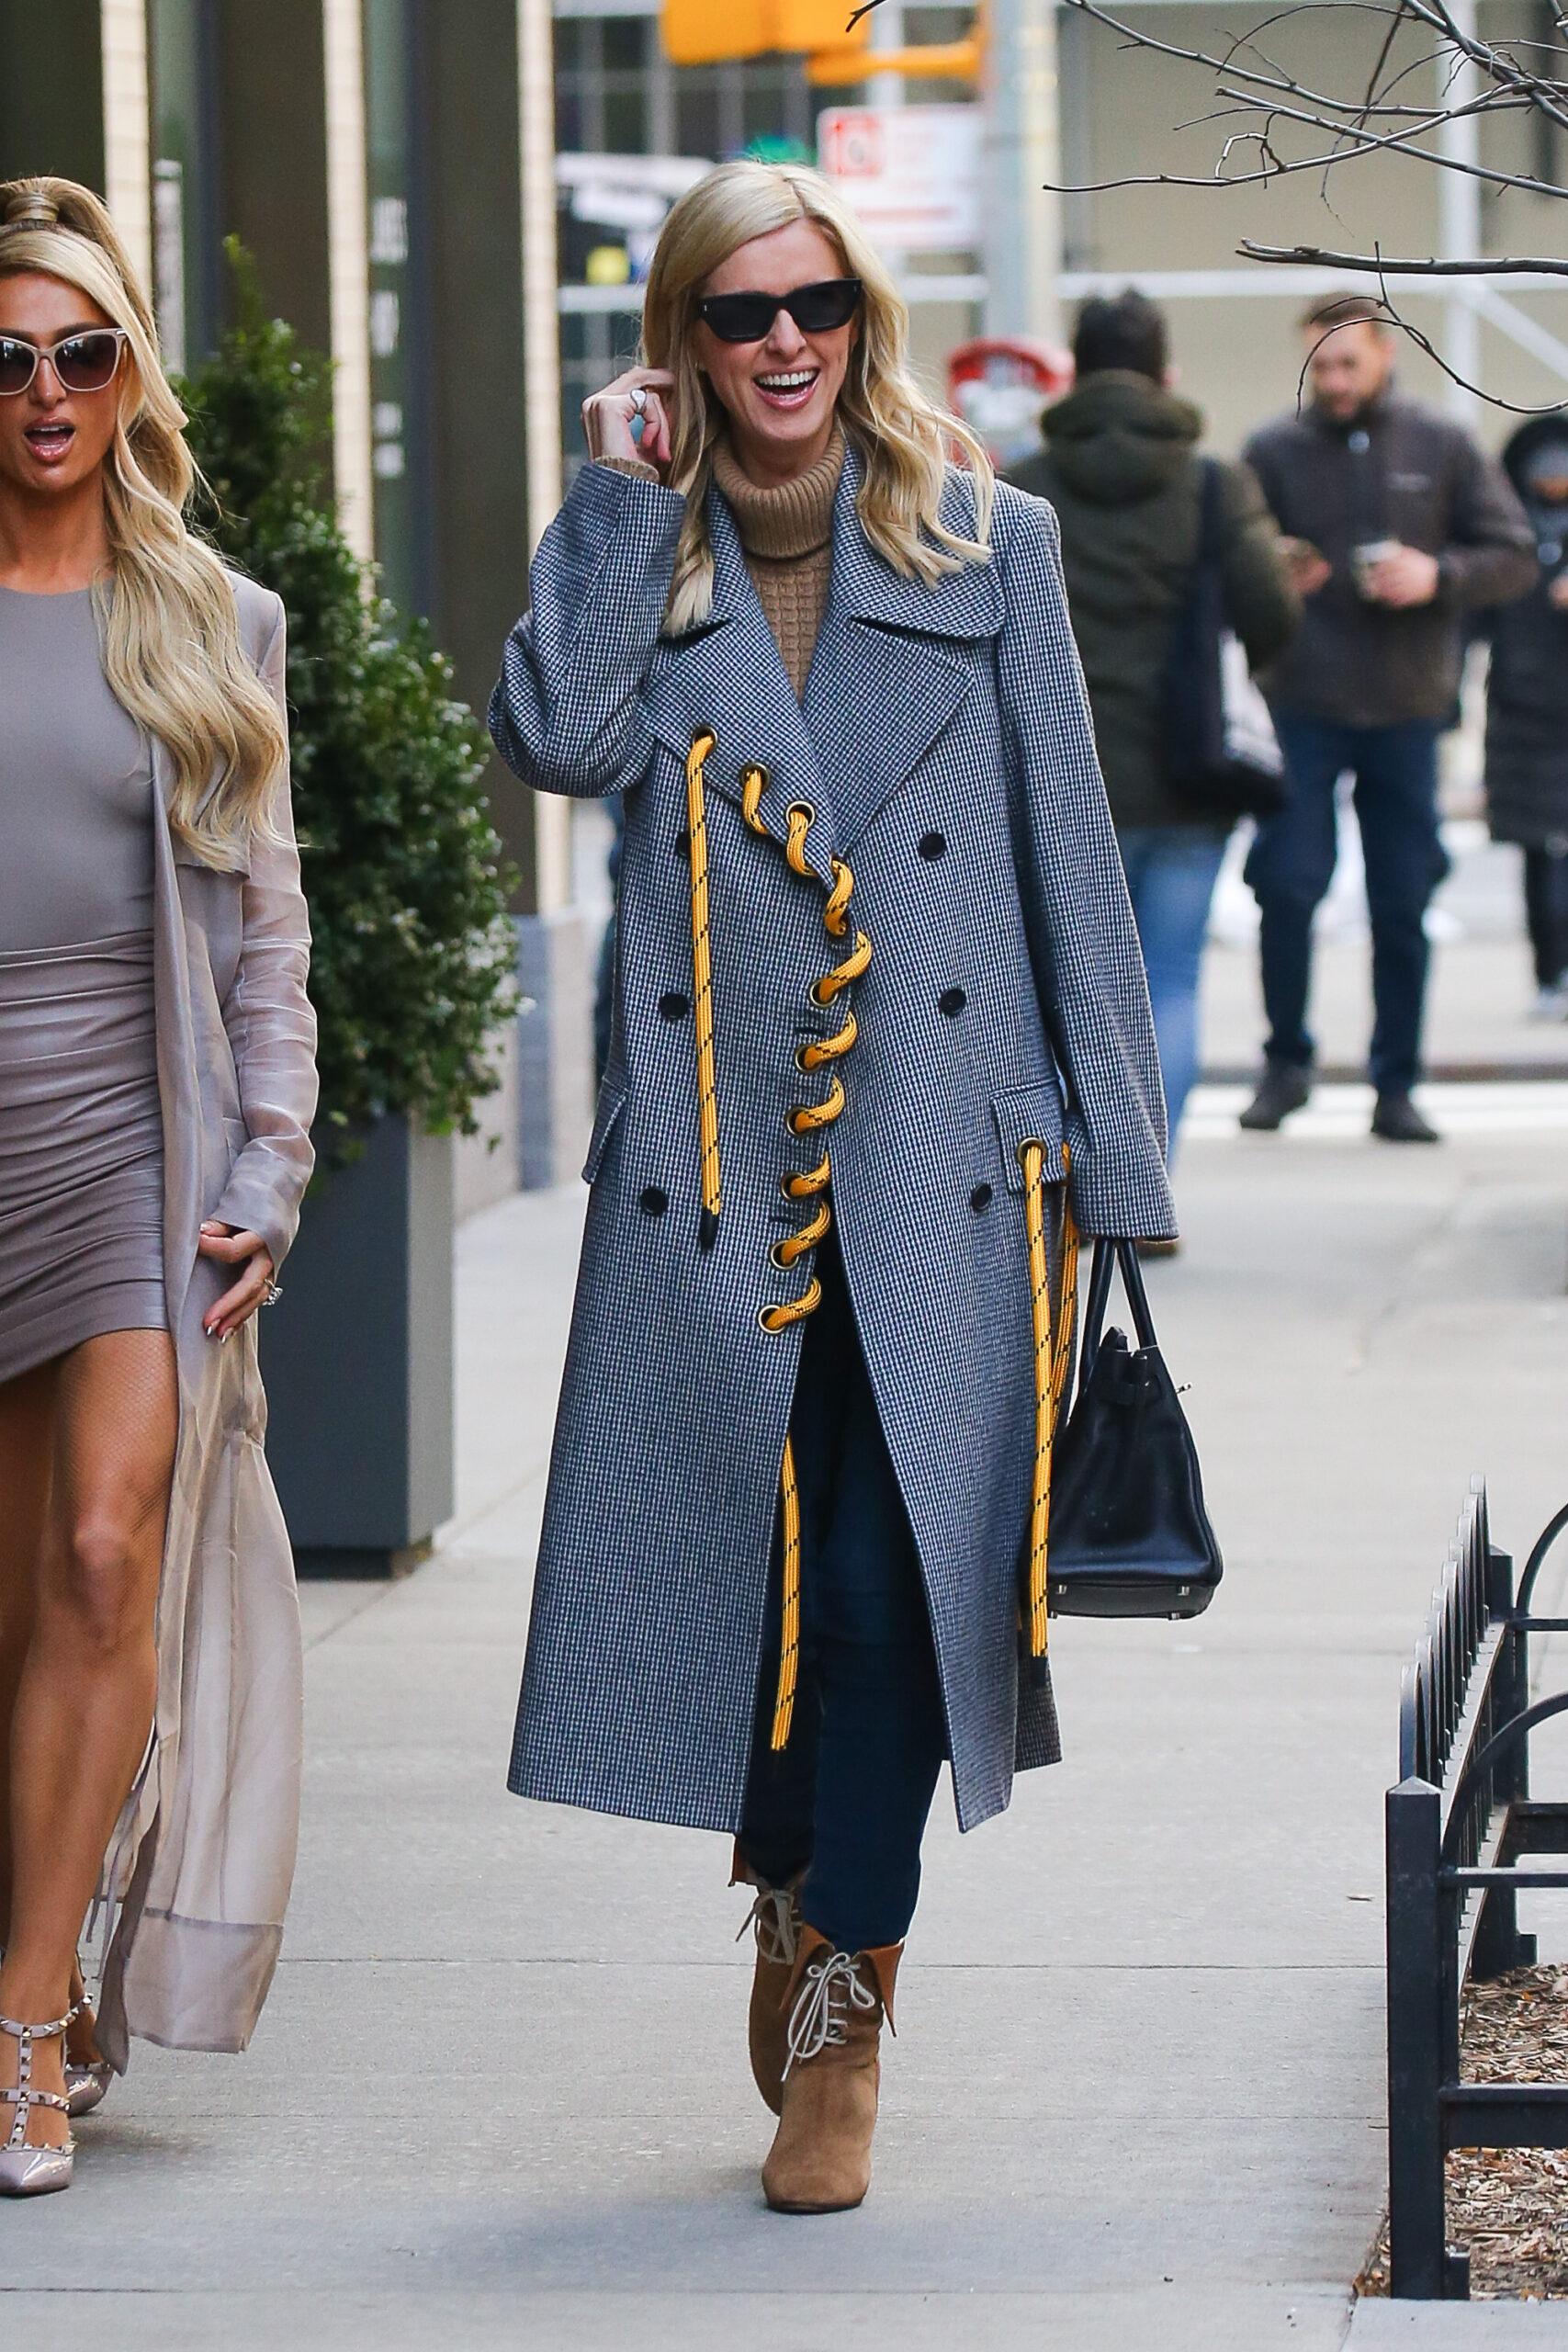 Pregnant Nicky Hilton seen all smiling while out and about with her sister Paris Hilton in New York City